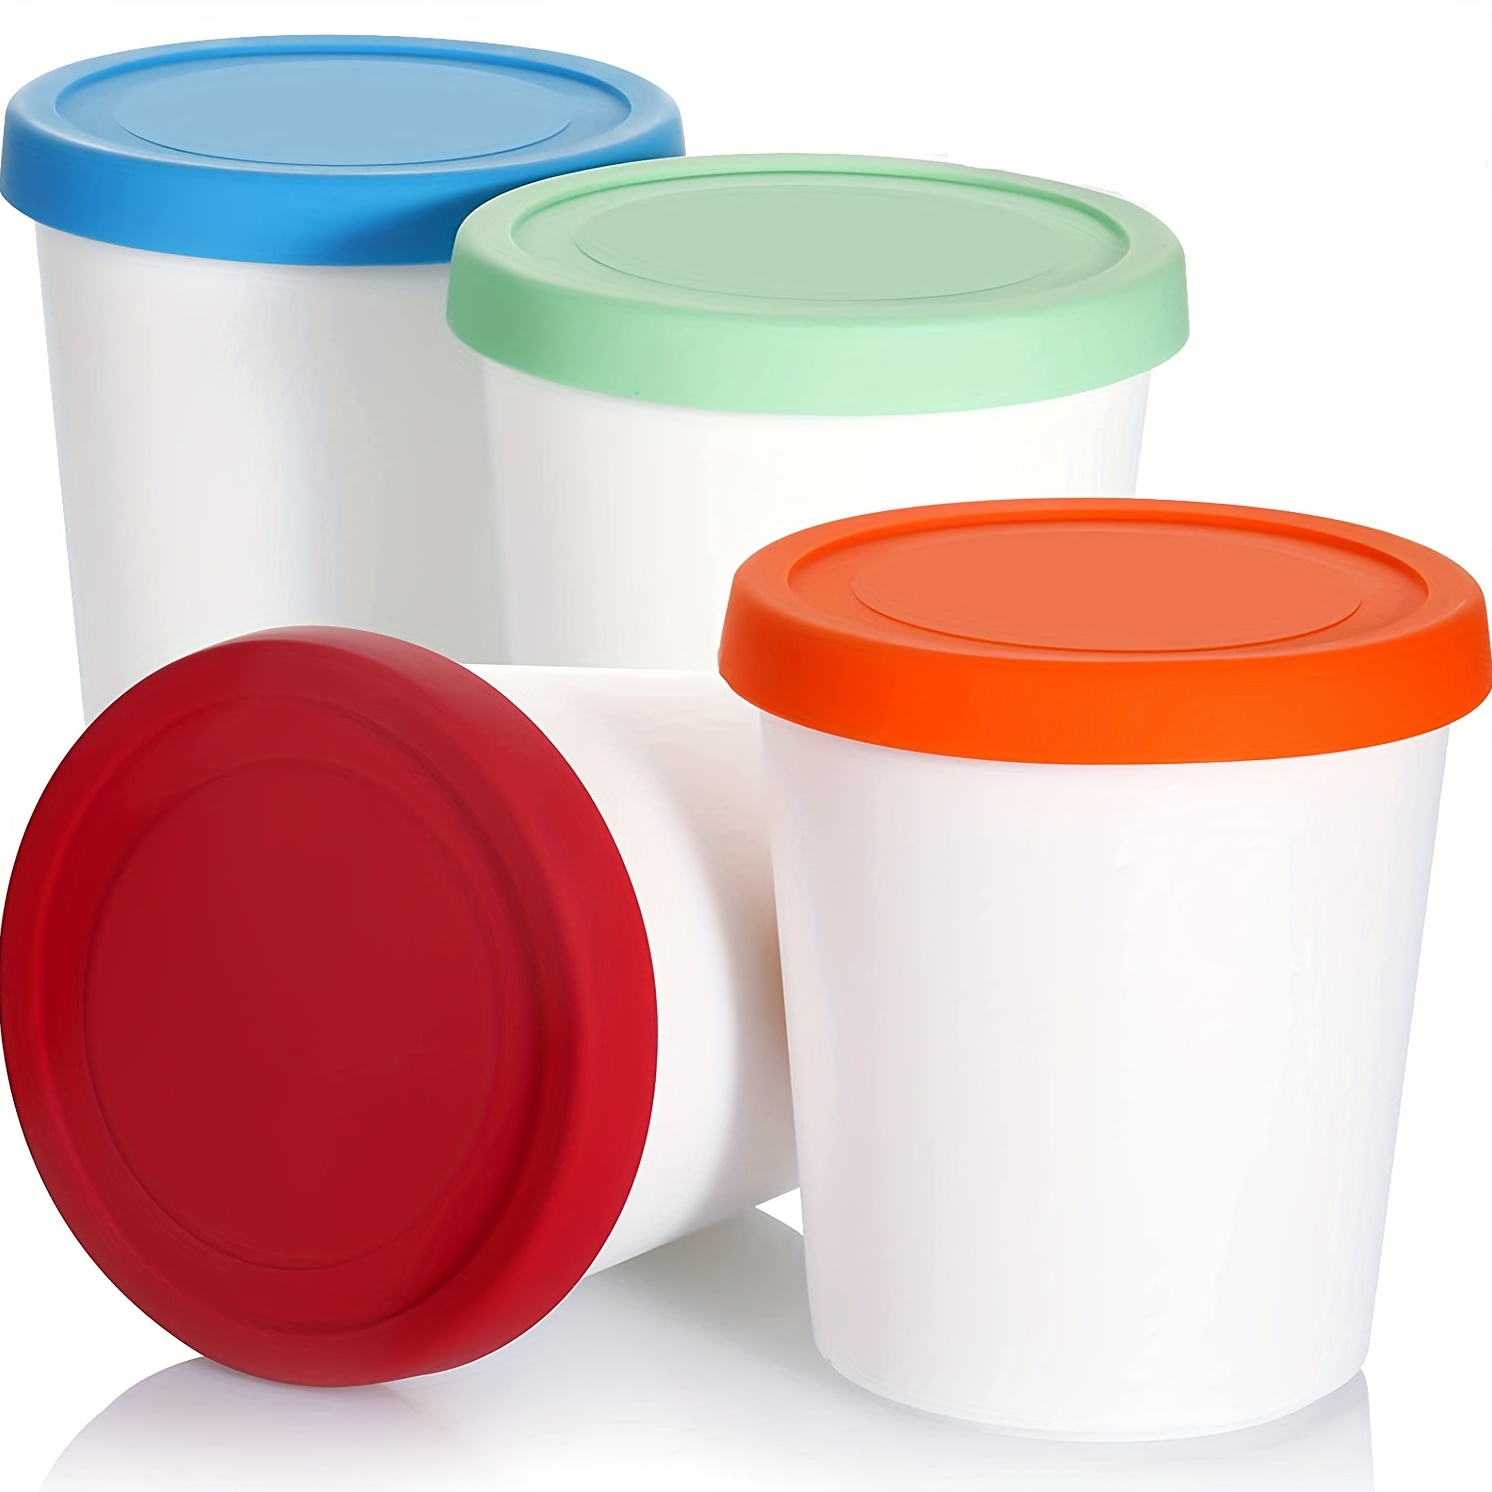 4 Pcs Ice Cream Containers Cup Reusable Freezer Storage Tubs With